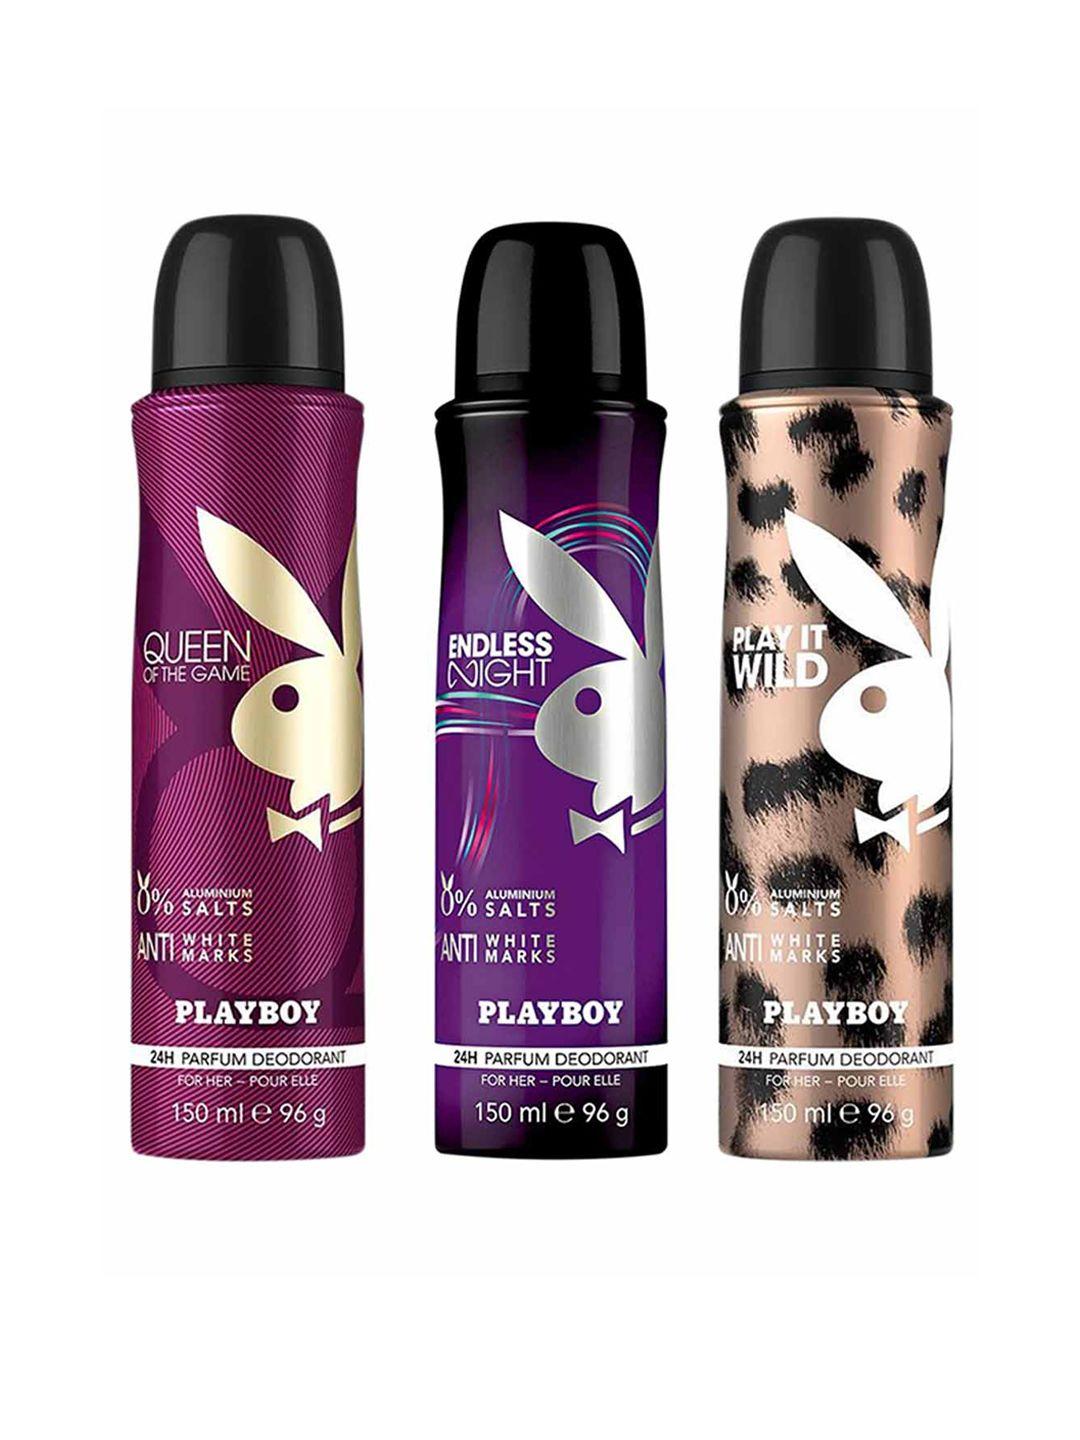 playboy women set of 3 deo- queen of the game + endless night + play it wild - 150ml each